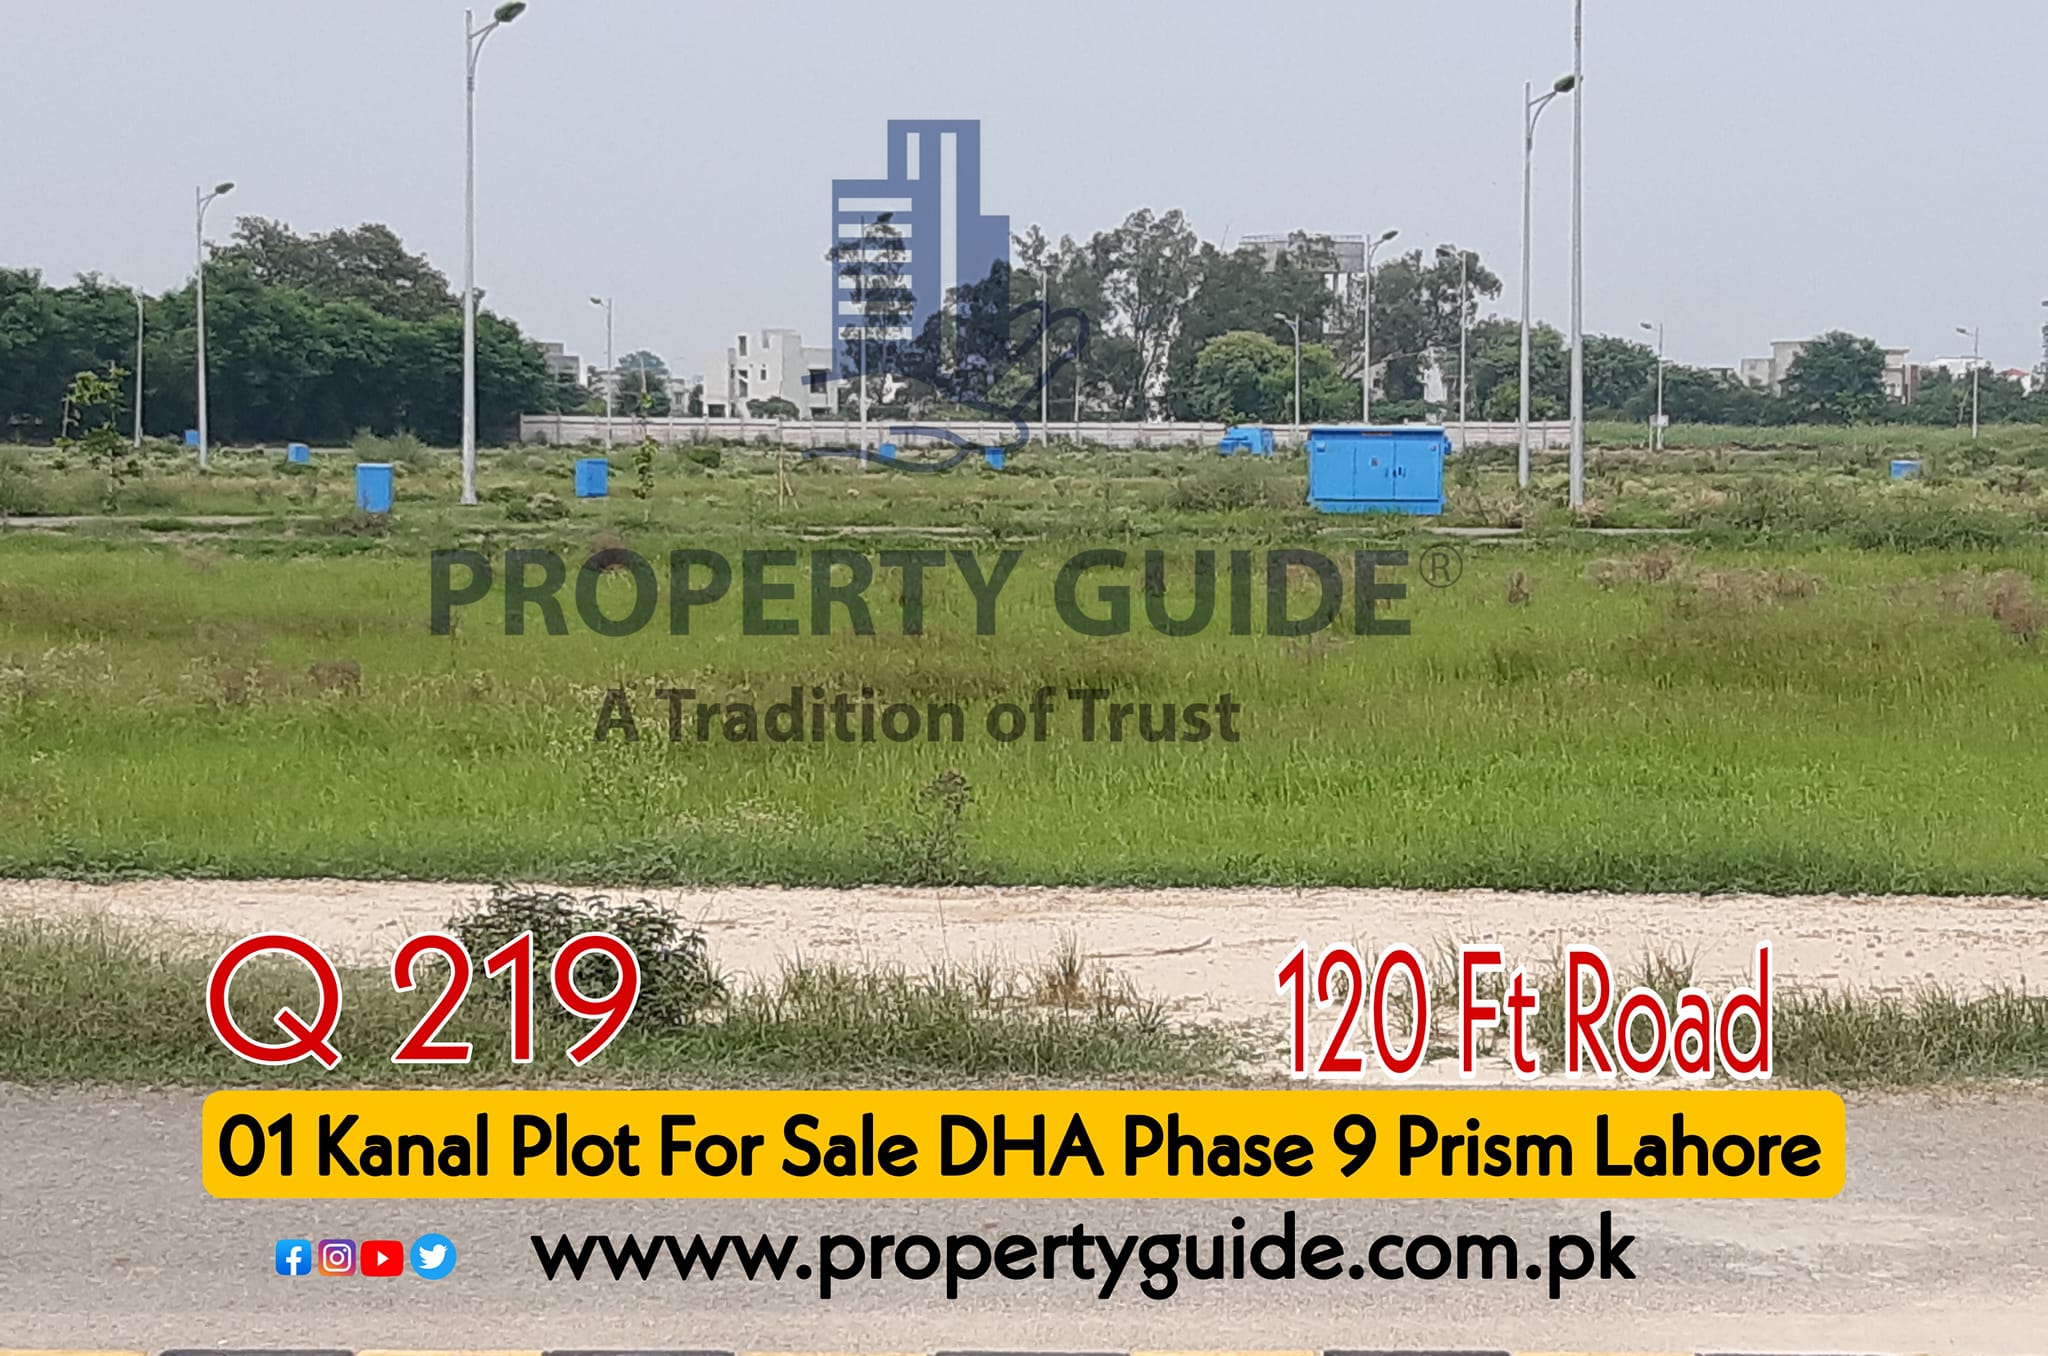 Kanal Plot For Sale DHA Phase 9 Prism Lahore Q 120 Feet Road